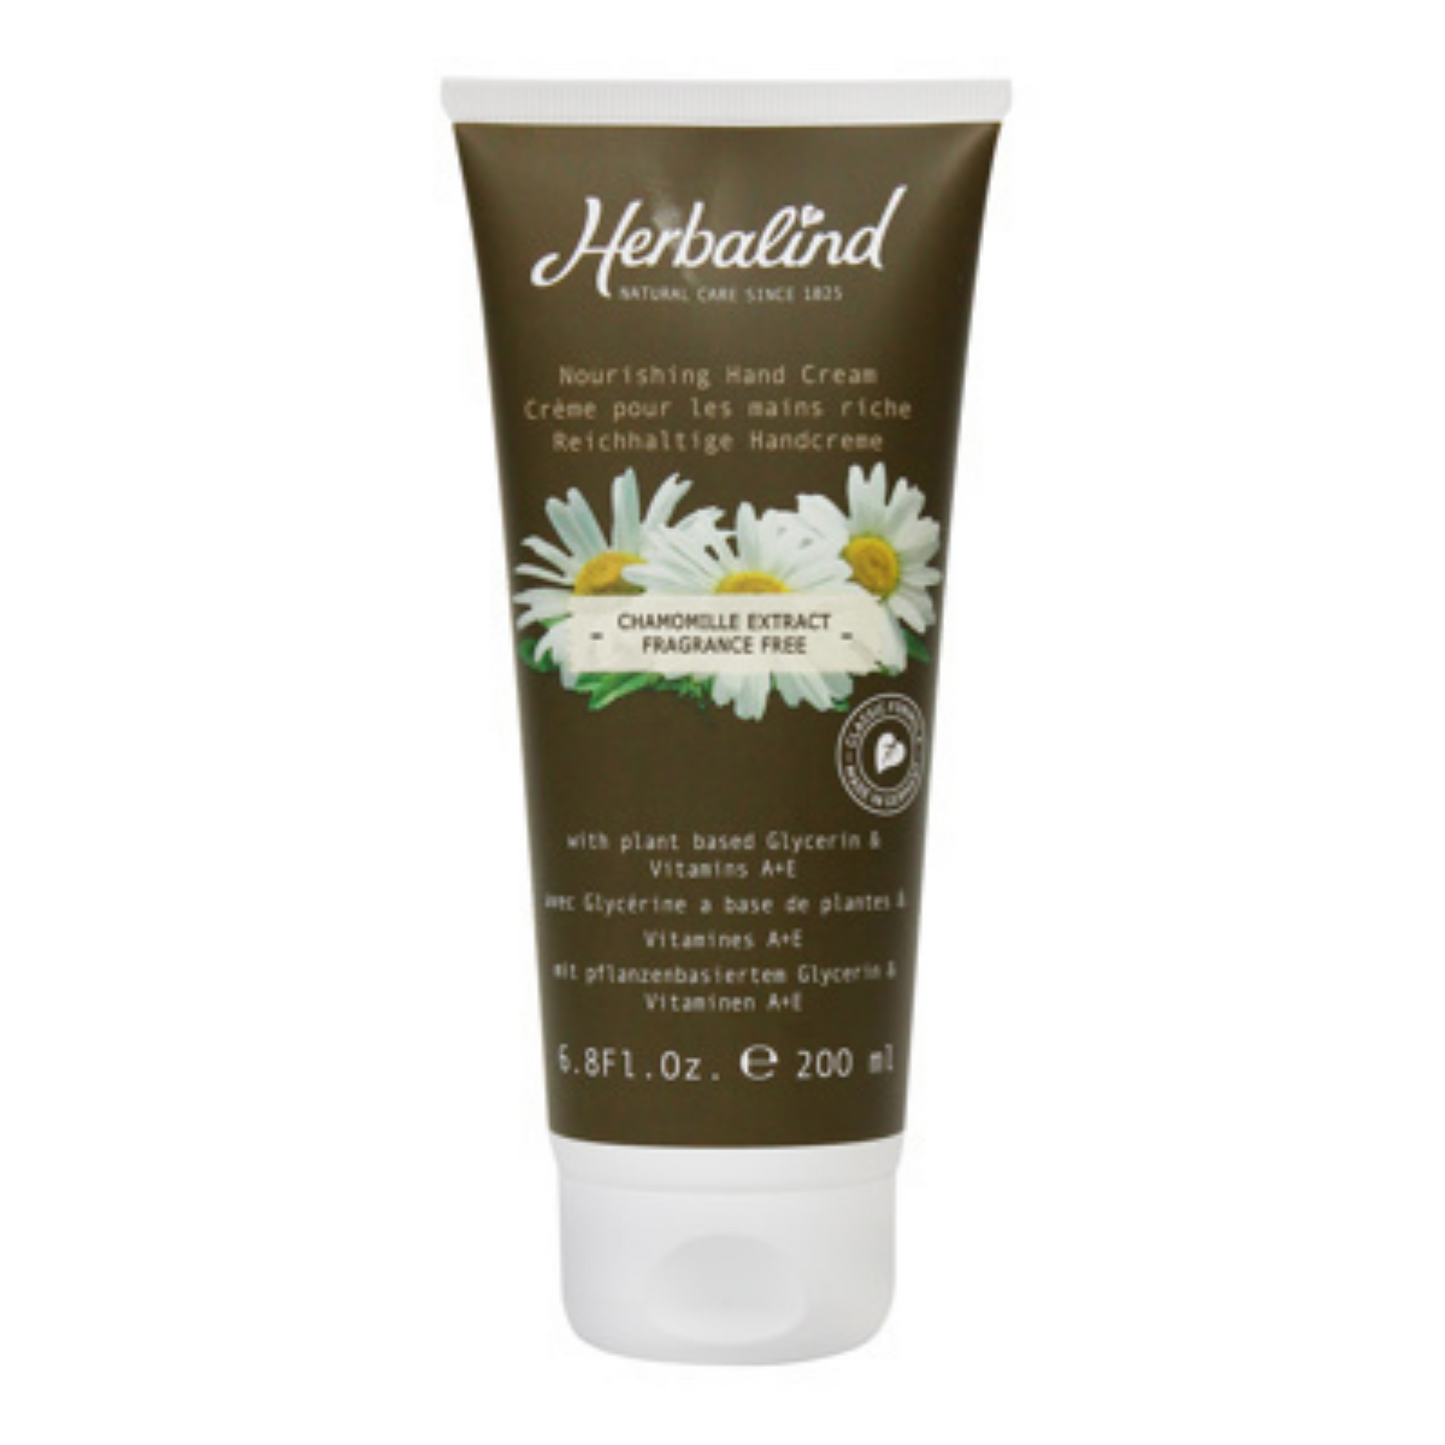 Primary image of Unscented Glycerin Hand Cream